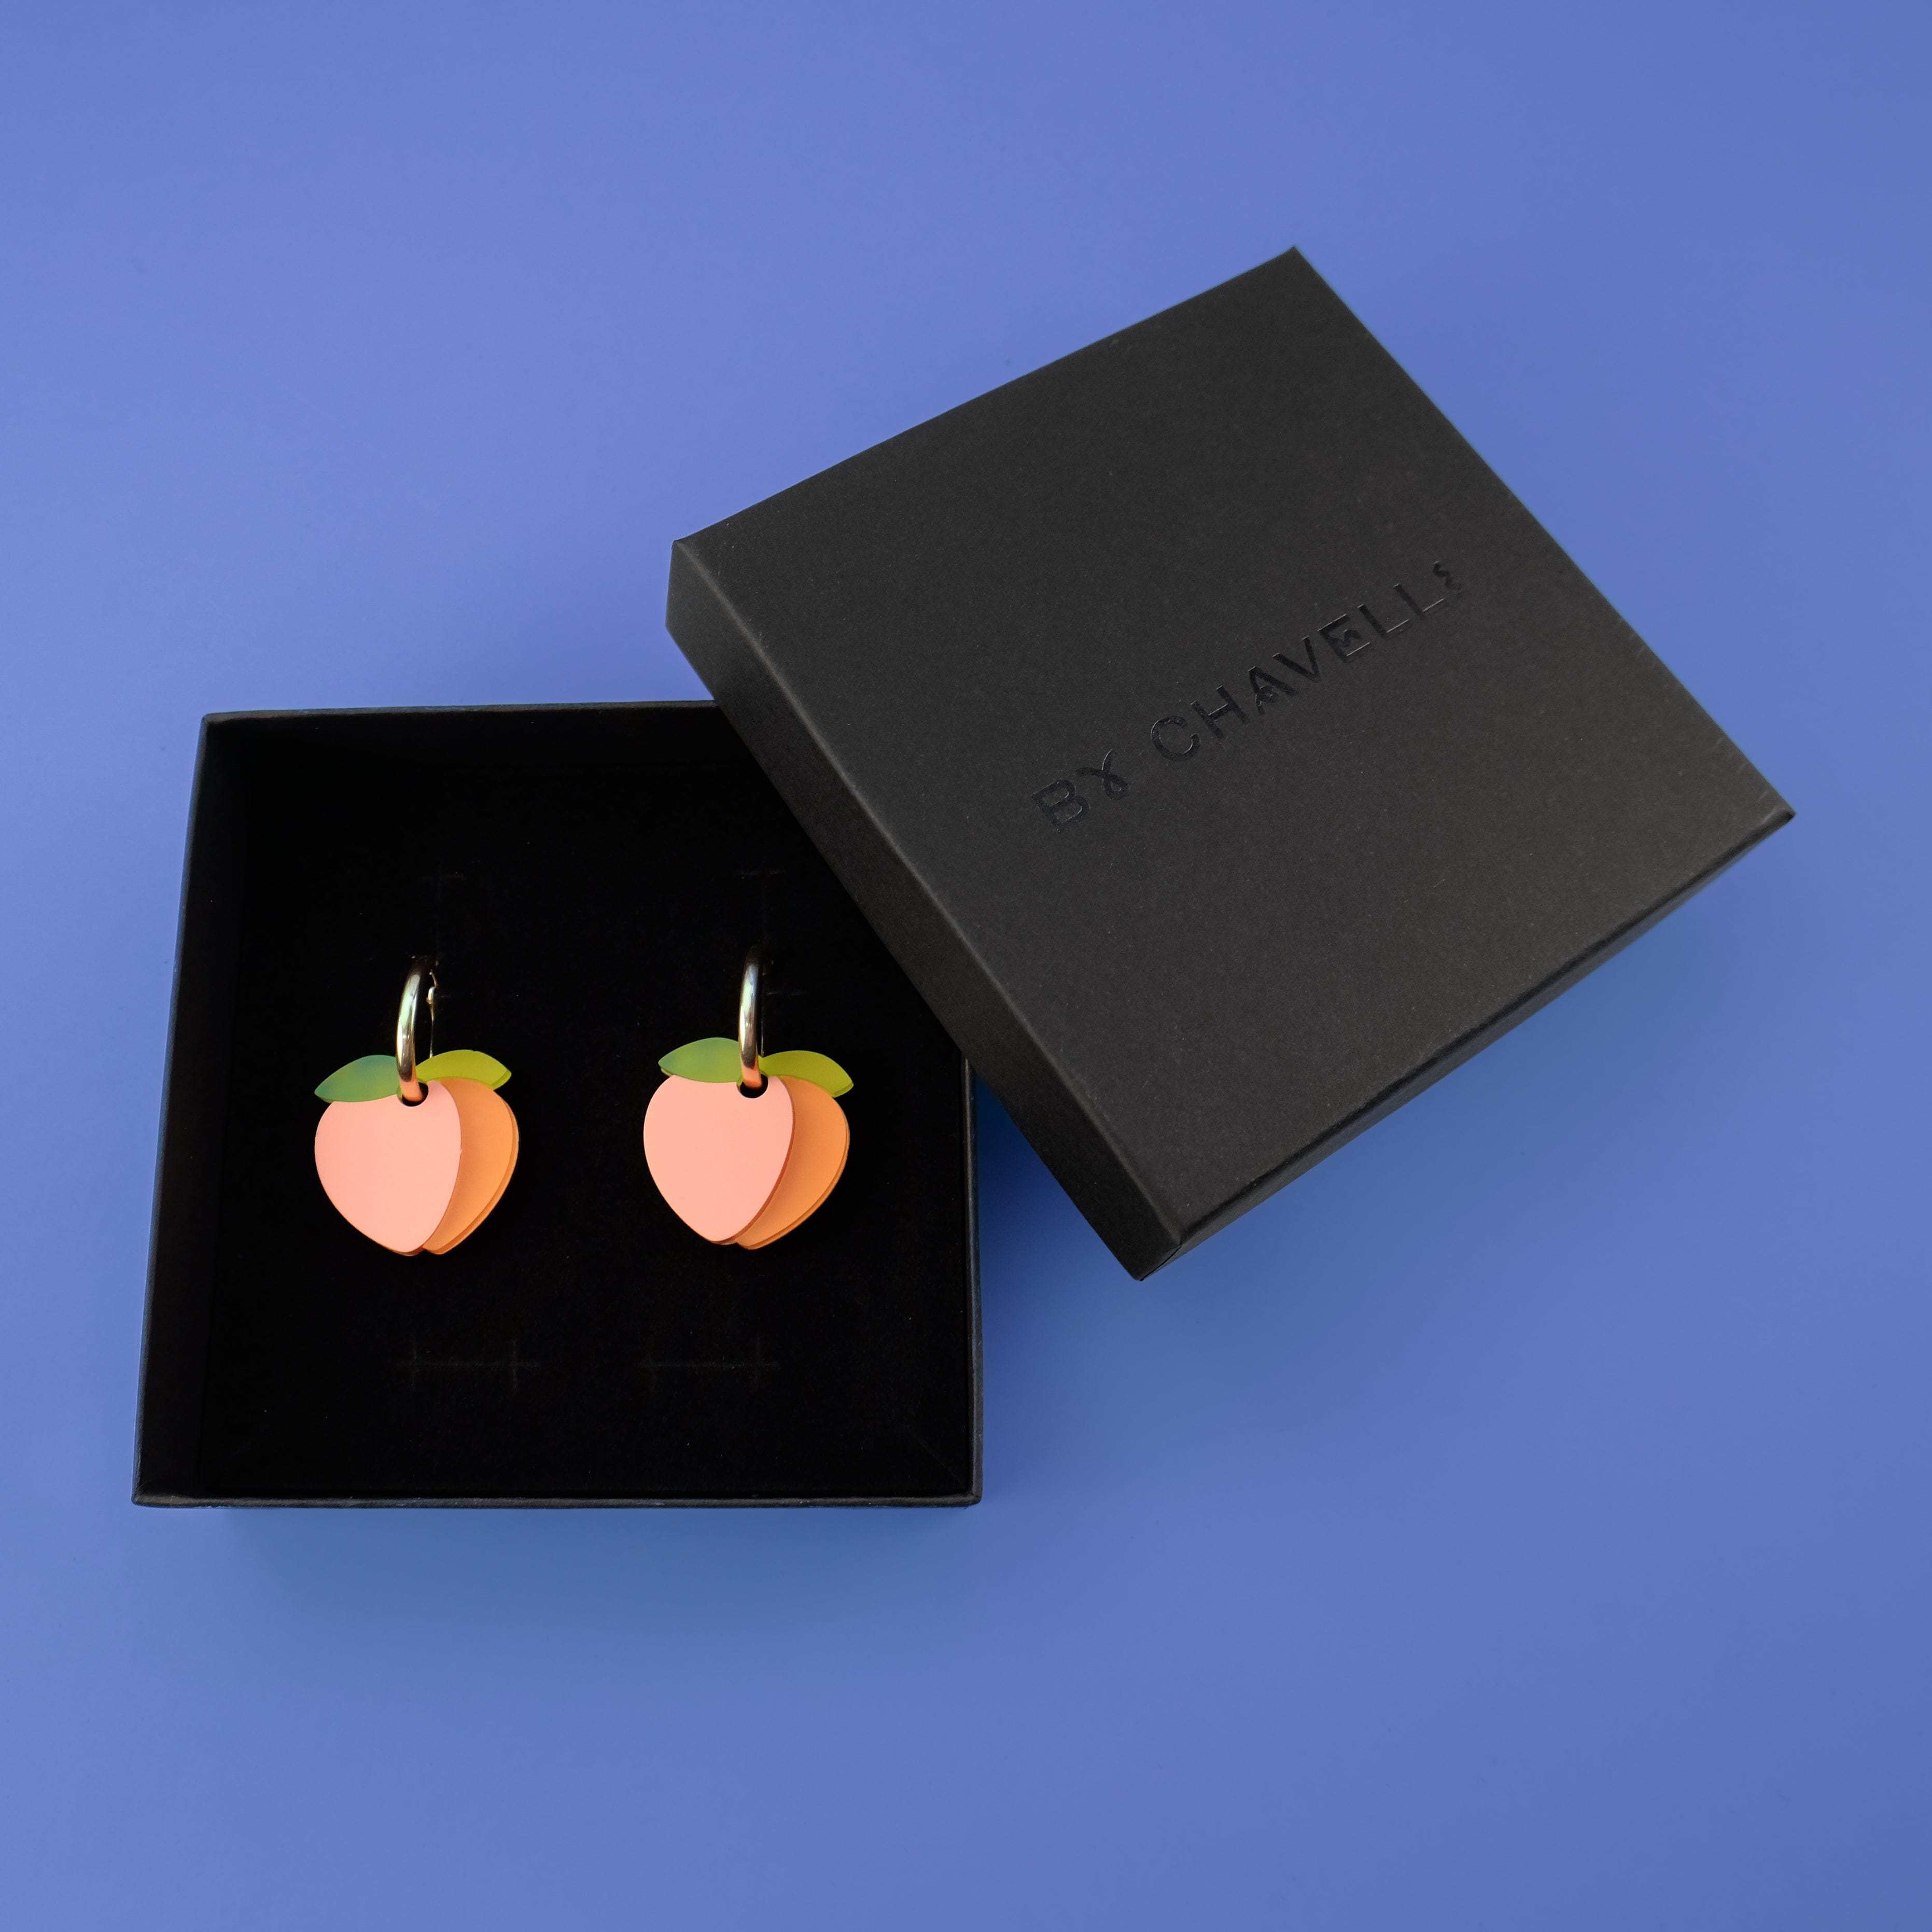 Cute, dainty and lightweight Peach dangly earrings with gold-filled hoops